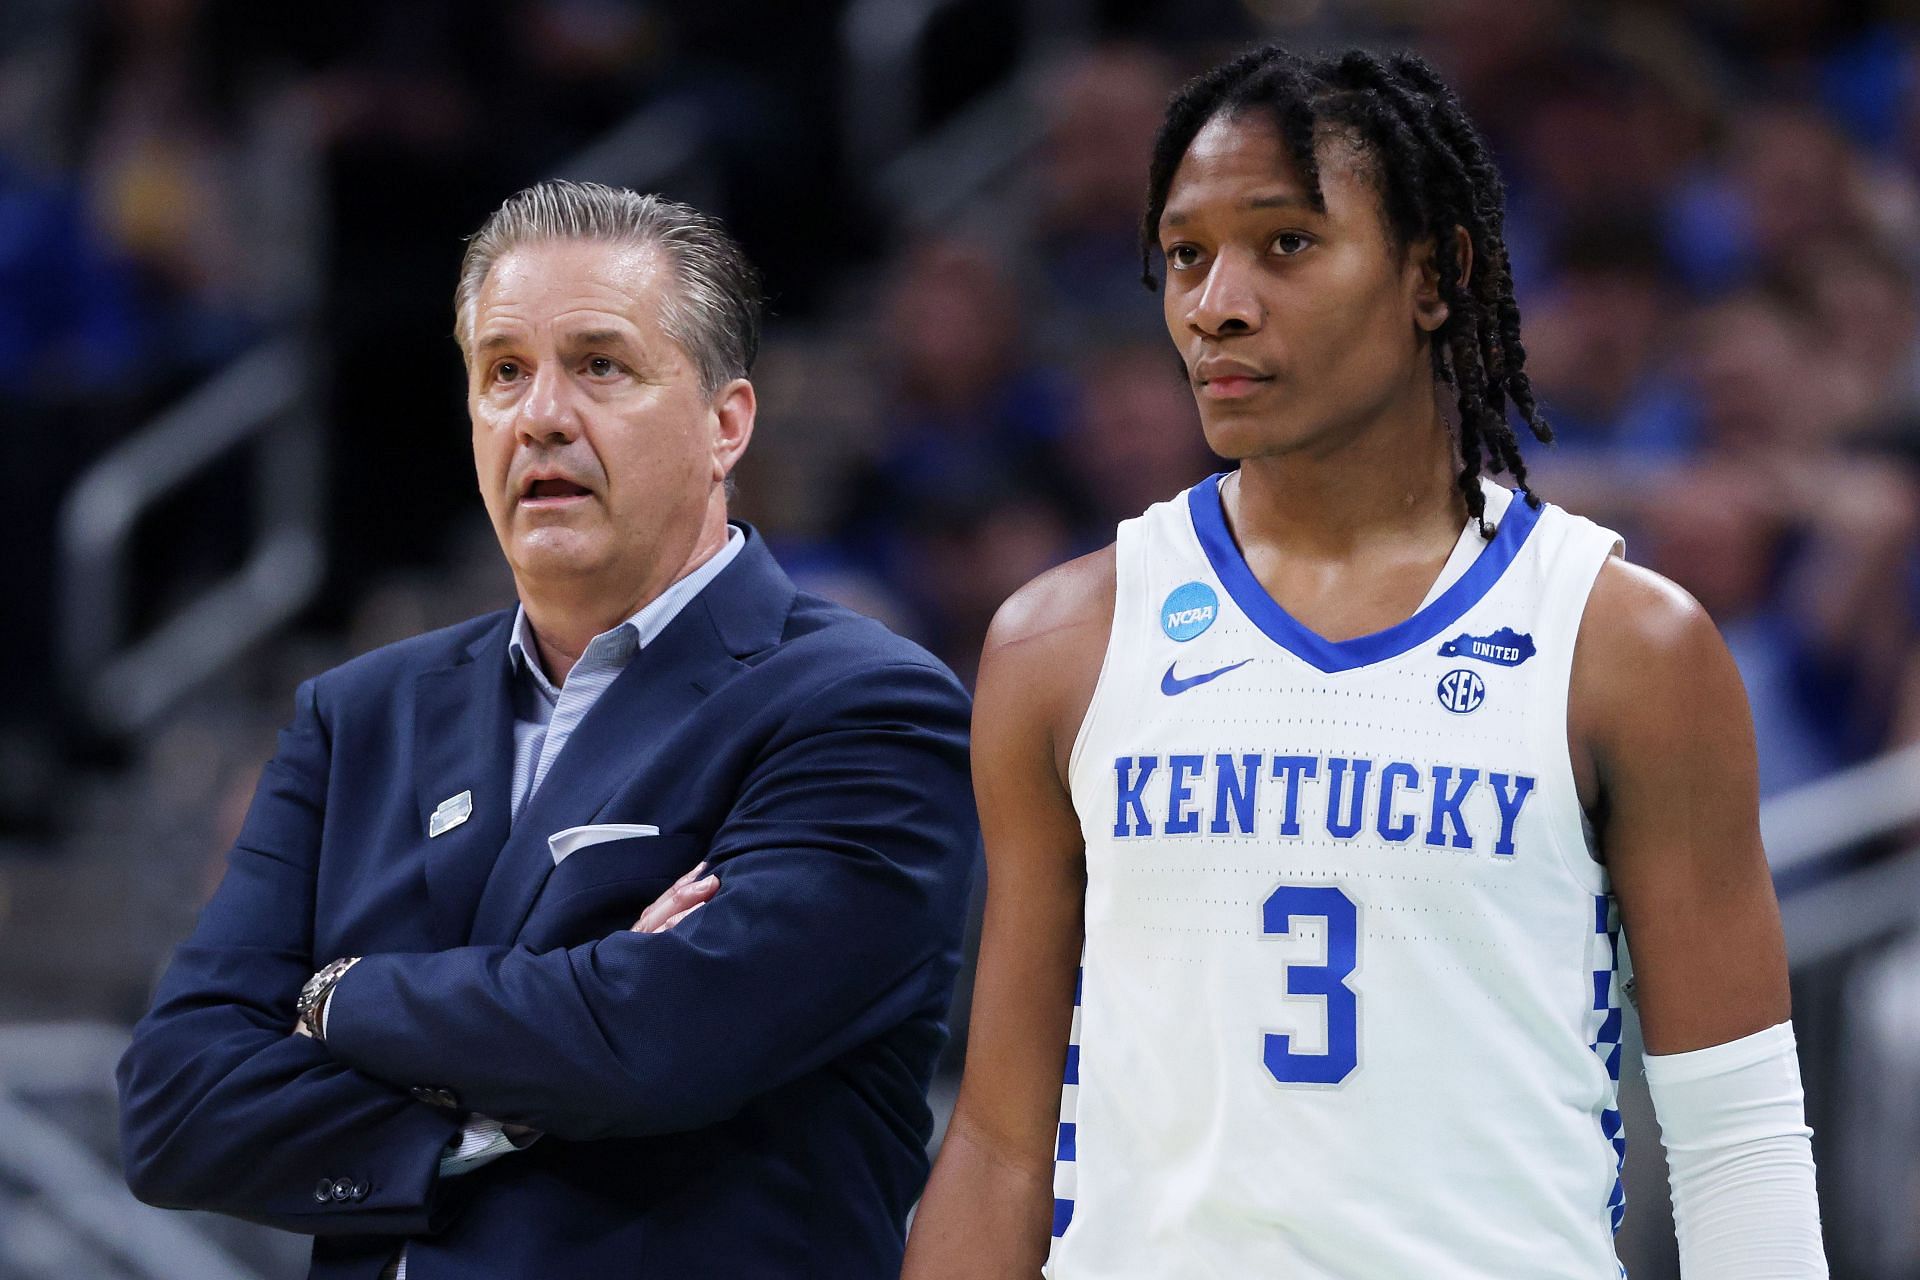 Kentucky and coach John Calipari are heading home early after their opening-round loss in the NCAA Tournament